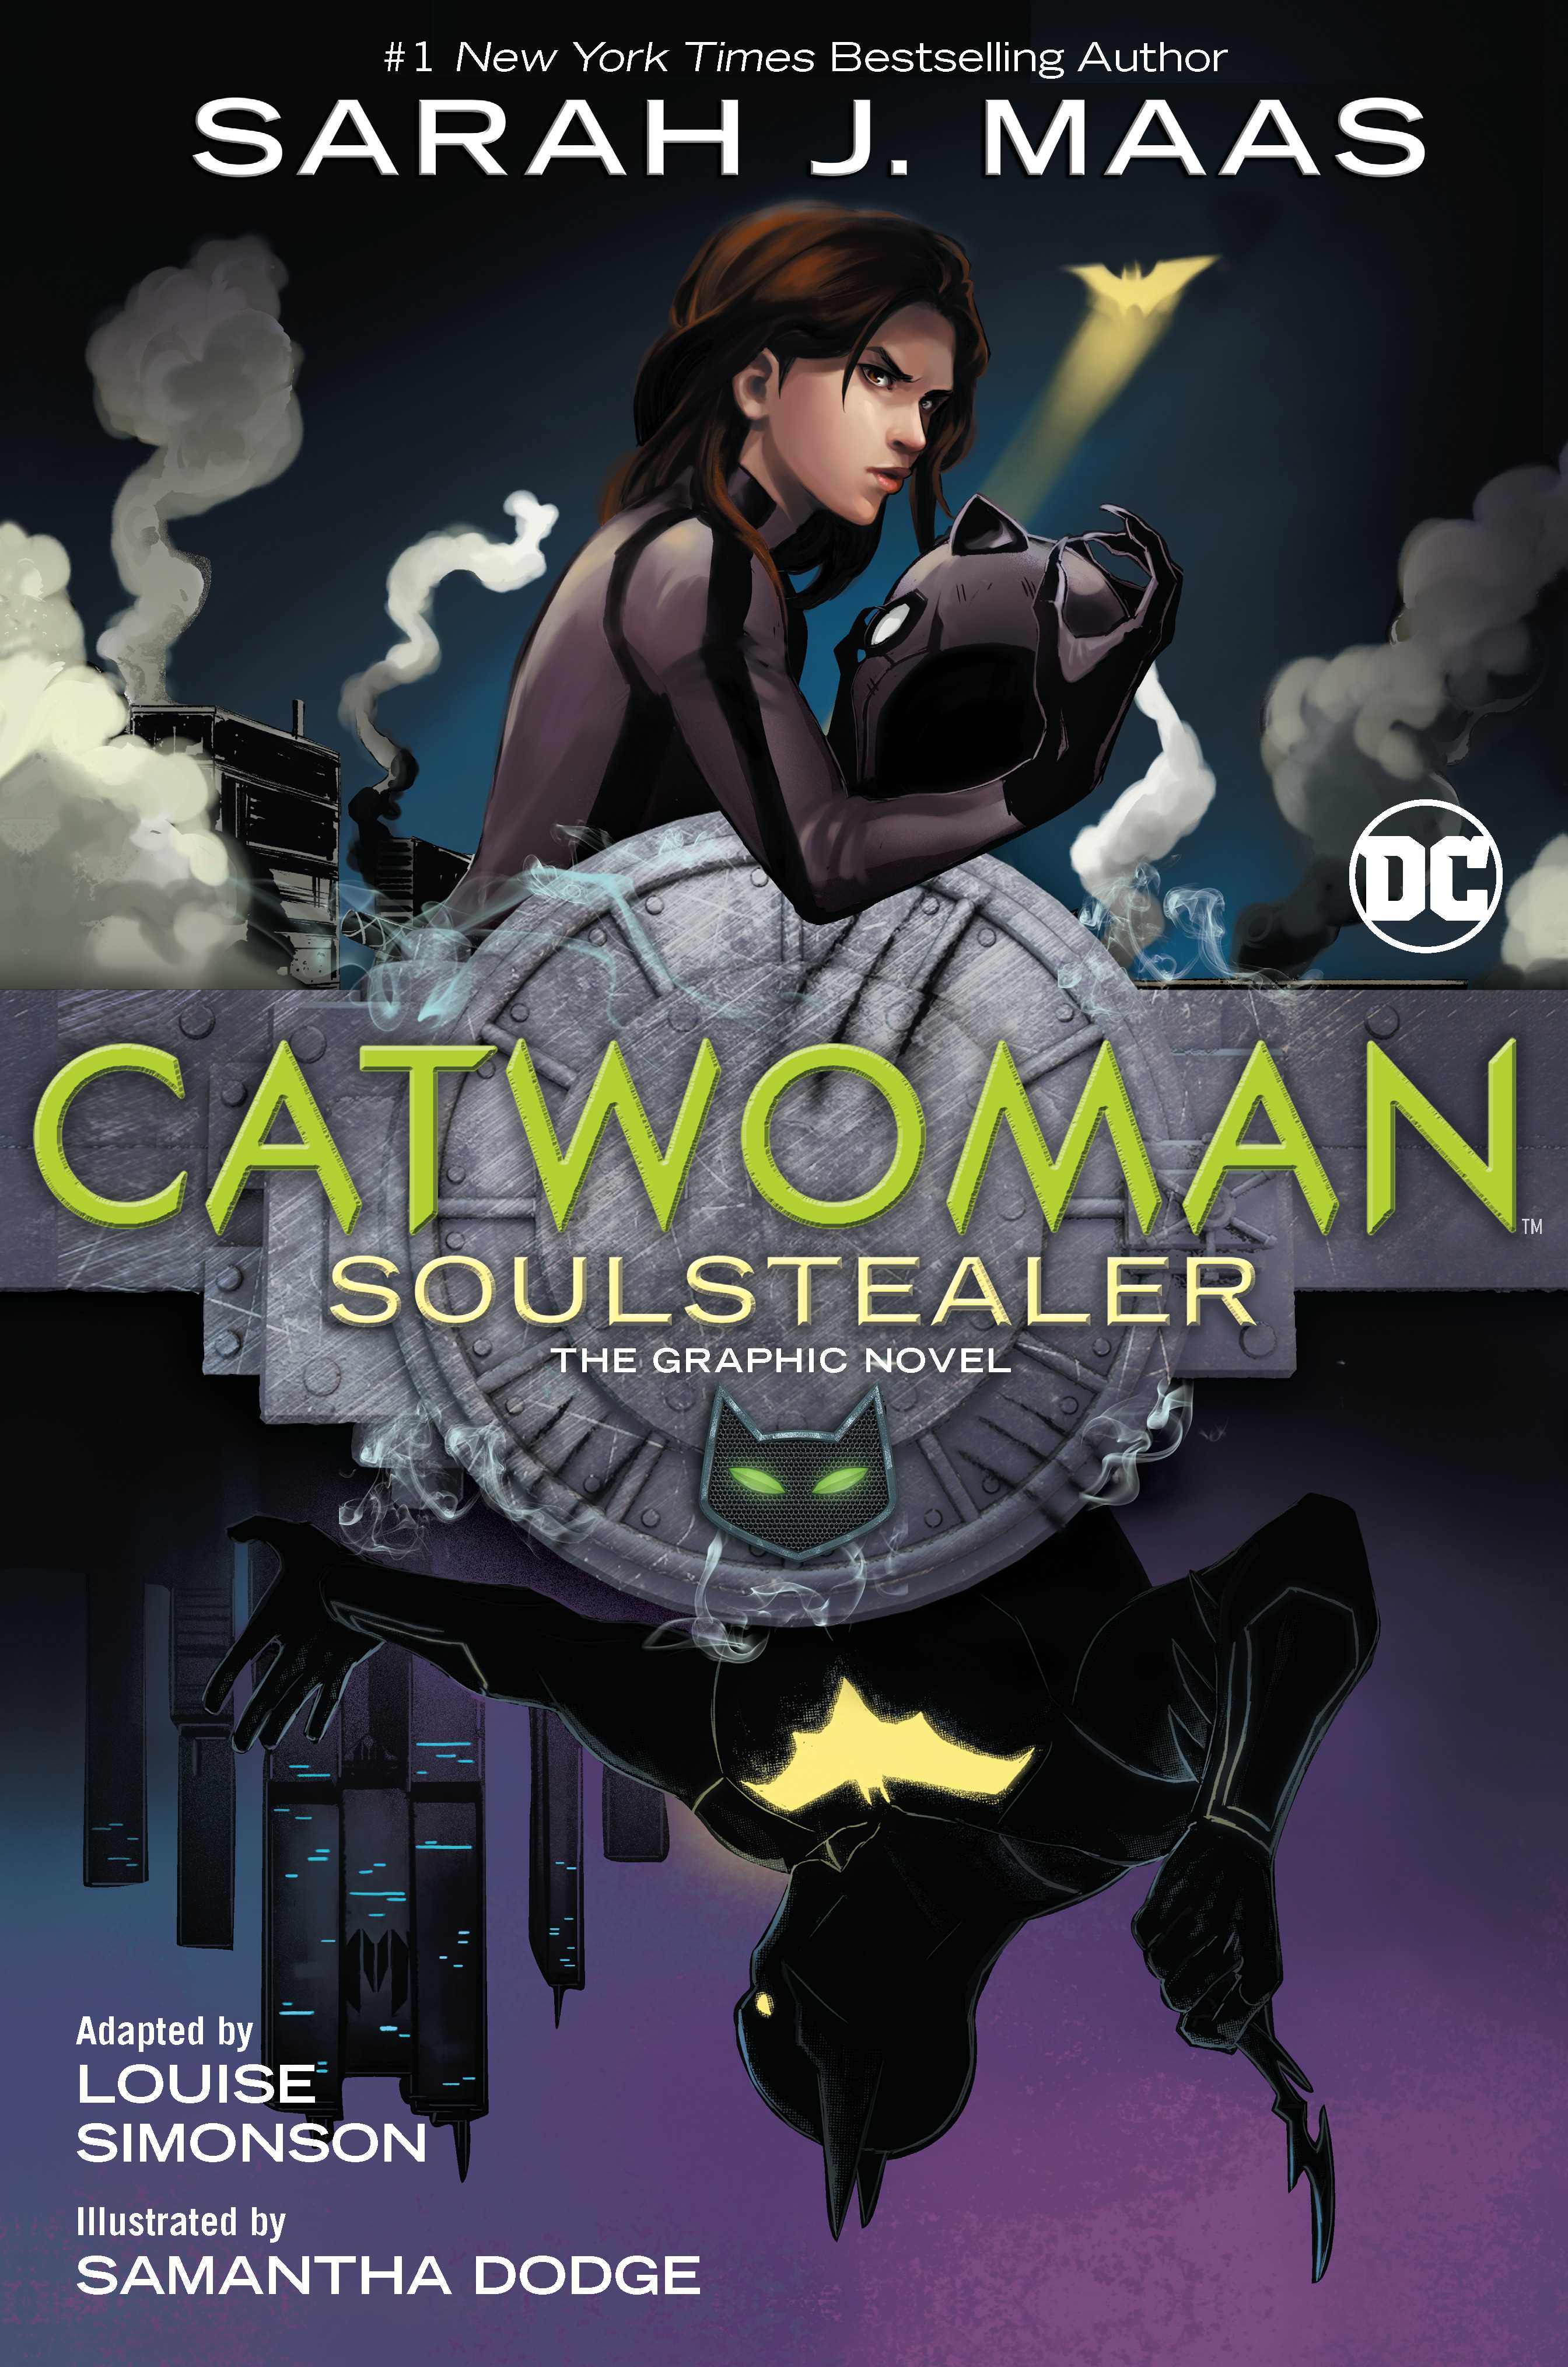 Catwoman: Soulstealer (The Graphic Novel)